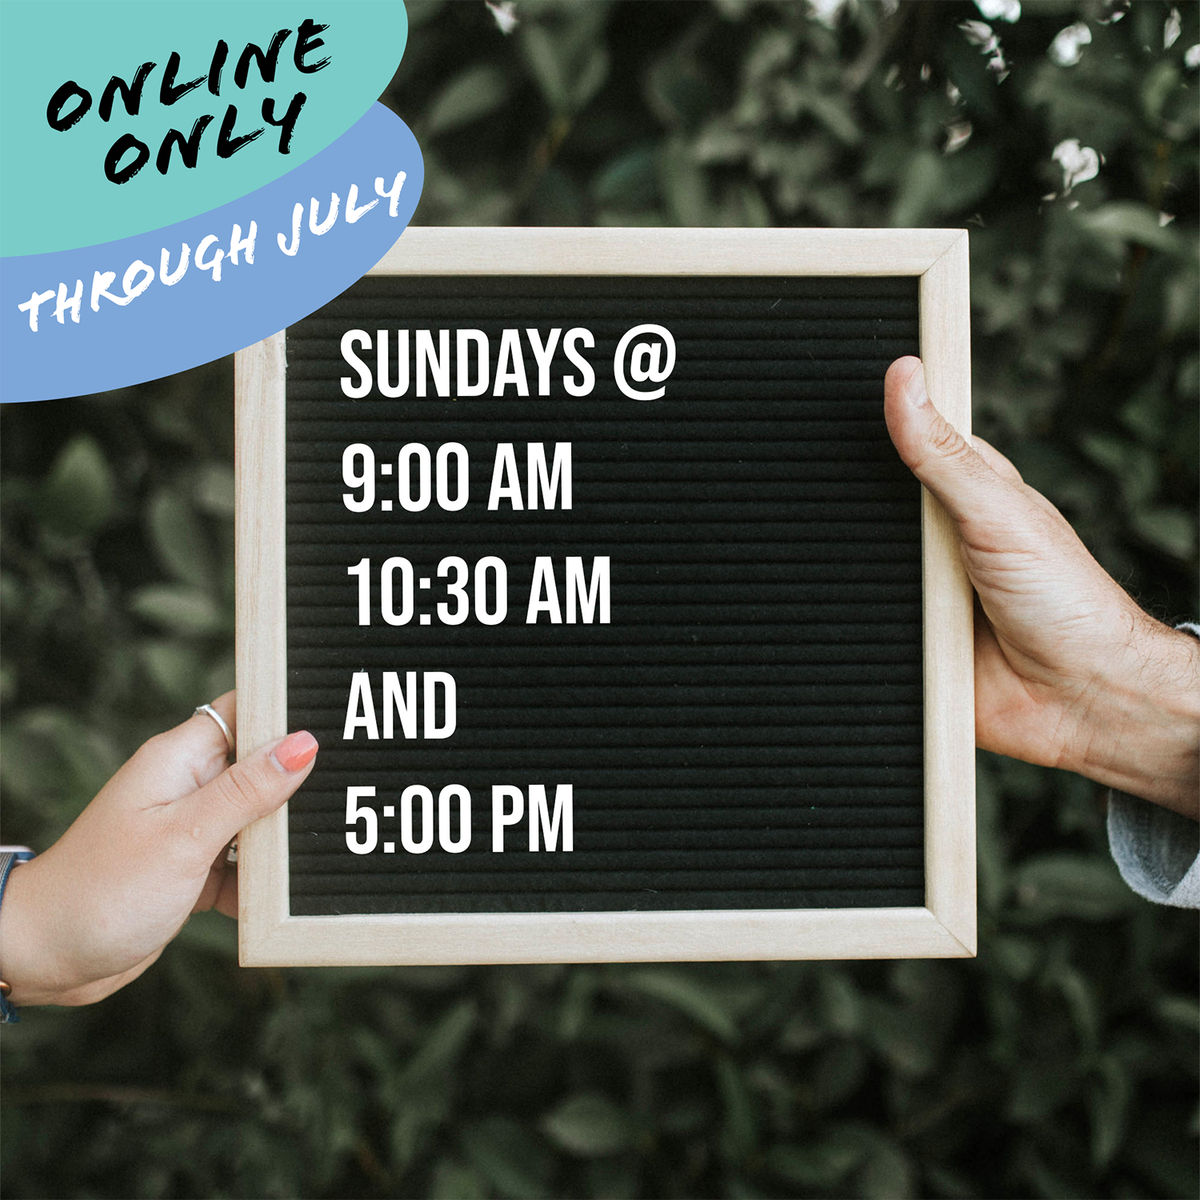 Family and friends, We will be continuing our Sunday services online ONLY through July. Please stay safe and well and join us Sundays at bayarea.church/live or on Facebook or Youtube at 9am, 10:30am or 5pm.